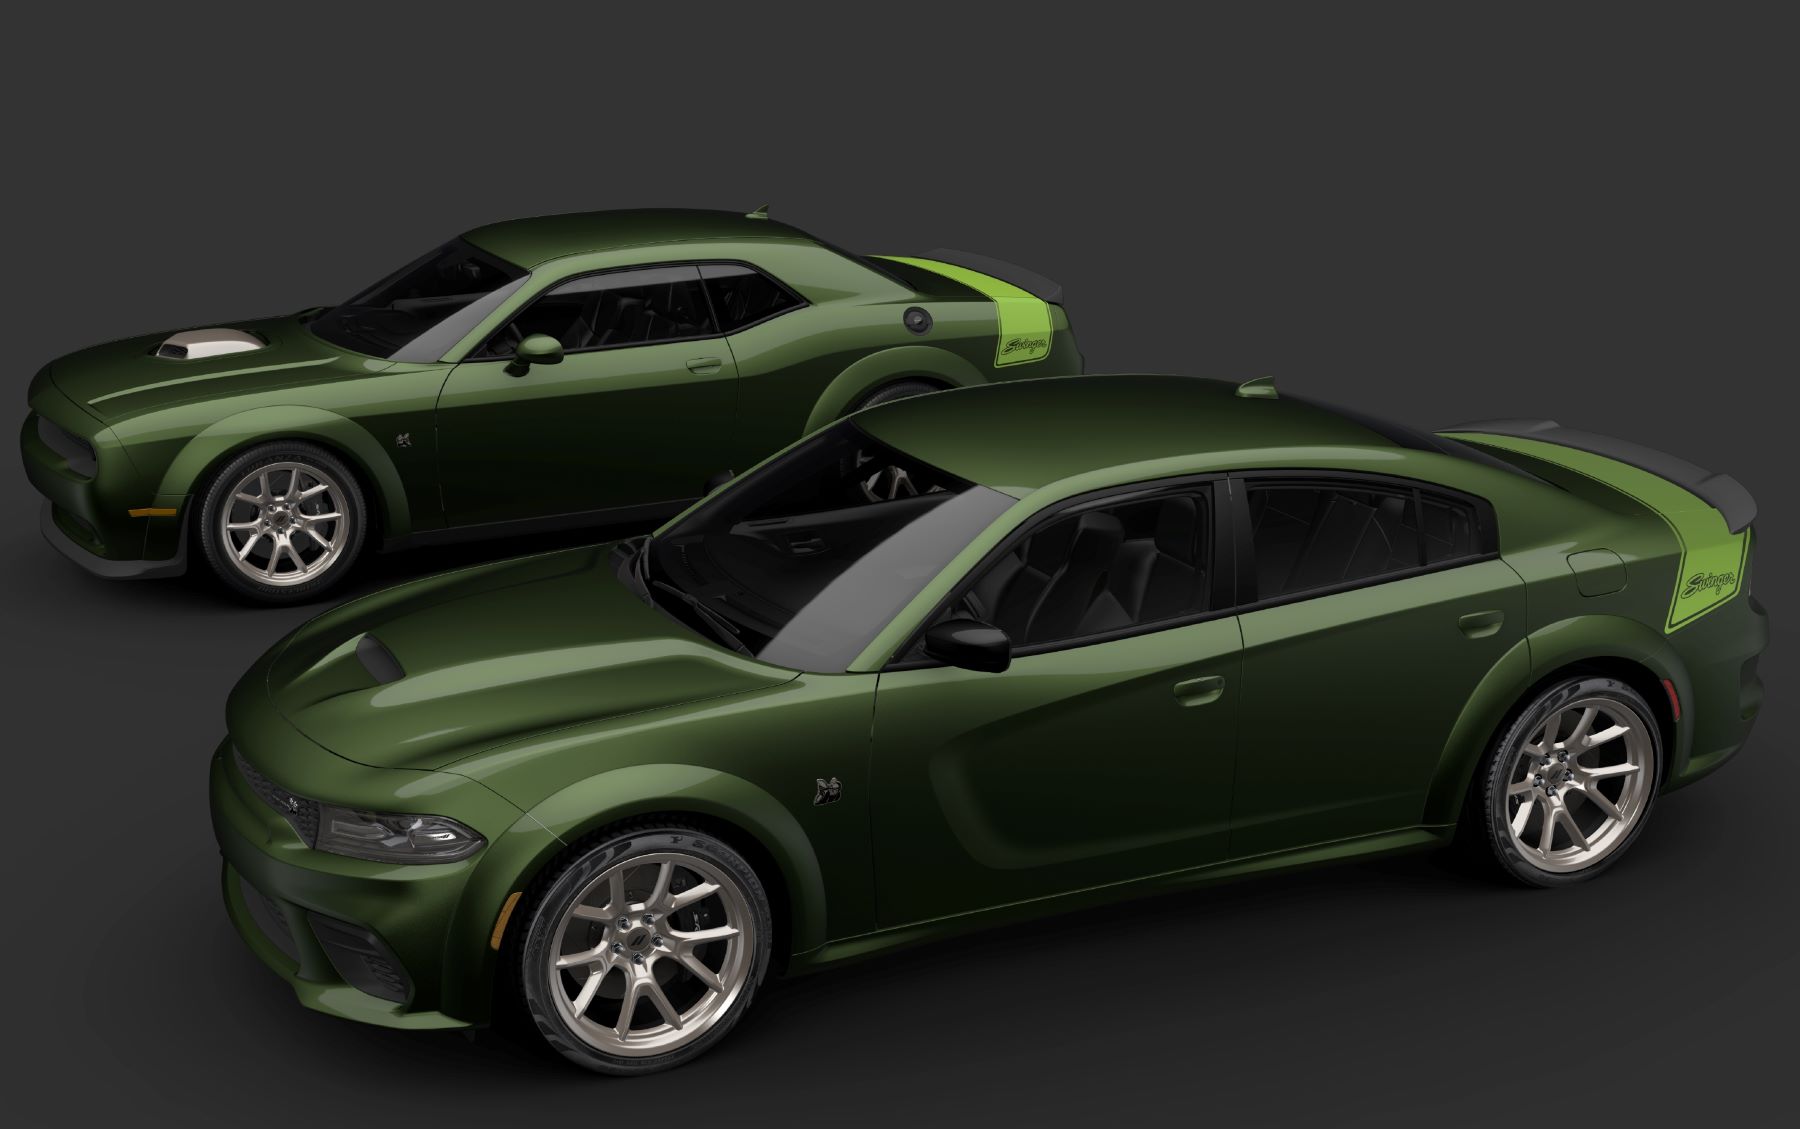 2023 Dodge Challenger and Charger Scat Pack Swinger special-edition models for the 'Last Call' lineup